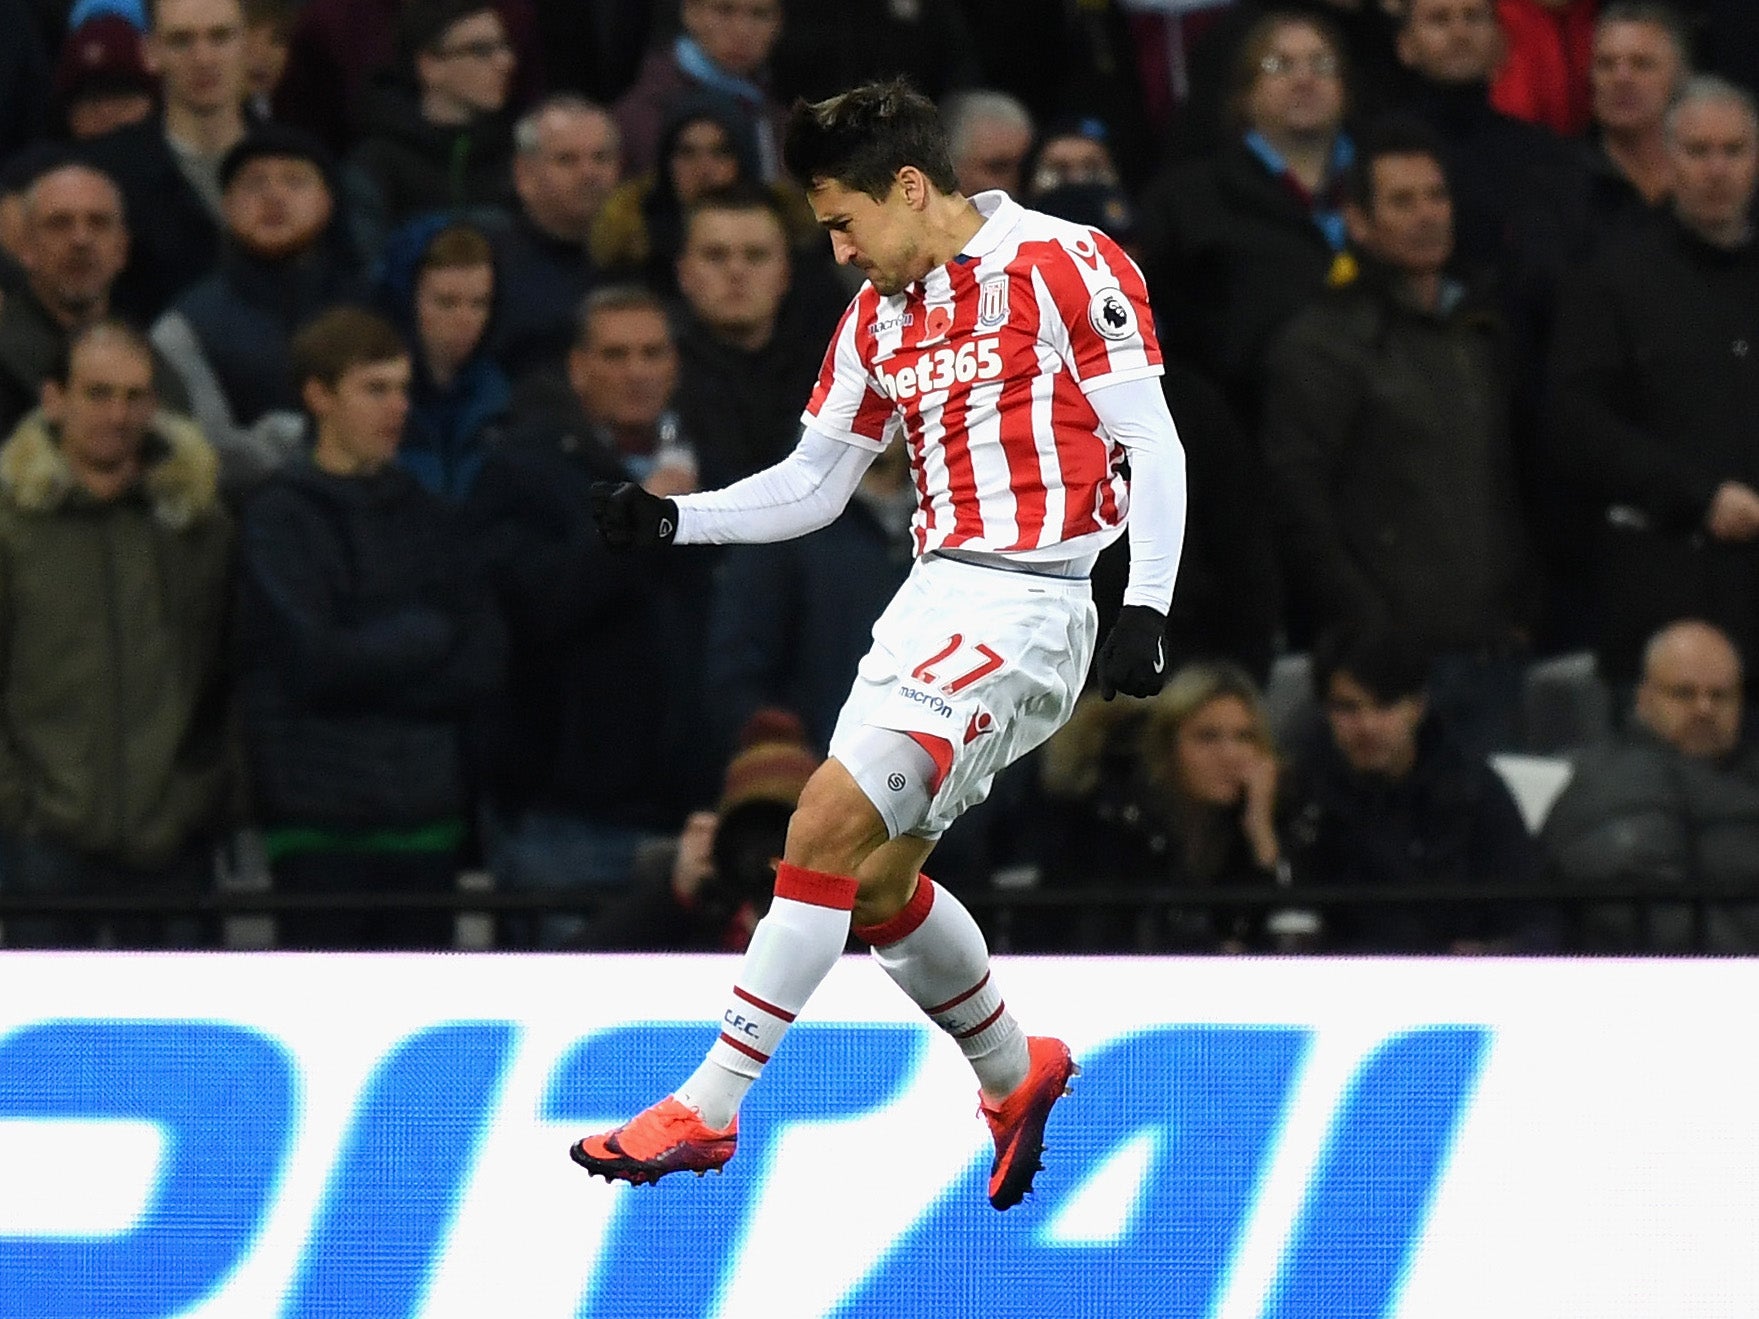 Bojan was able to finish on his return to the side